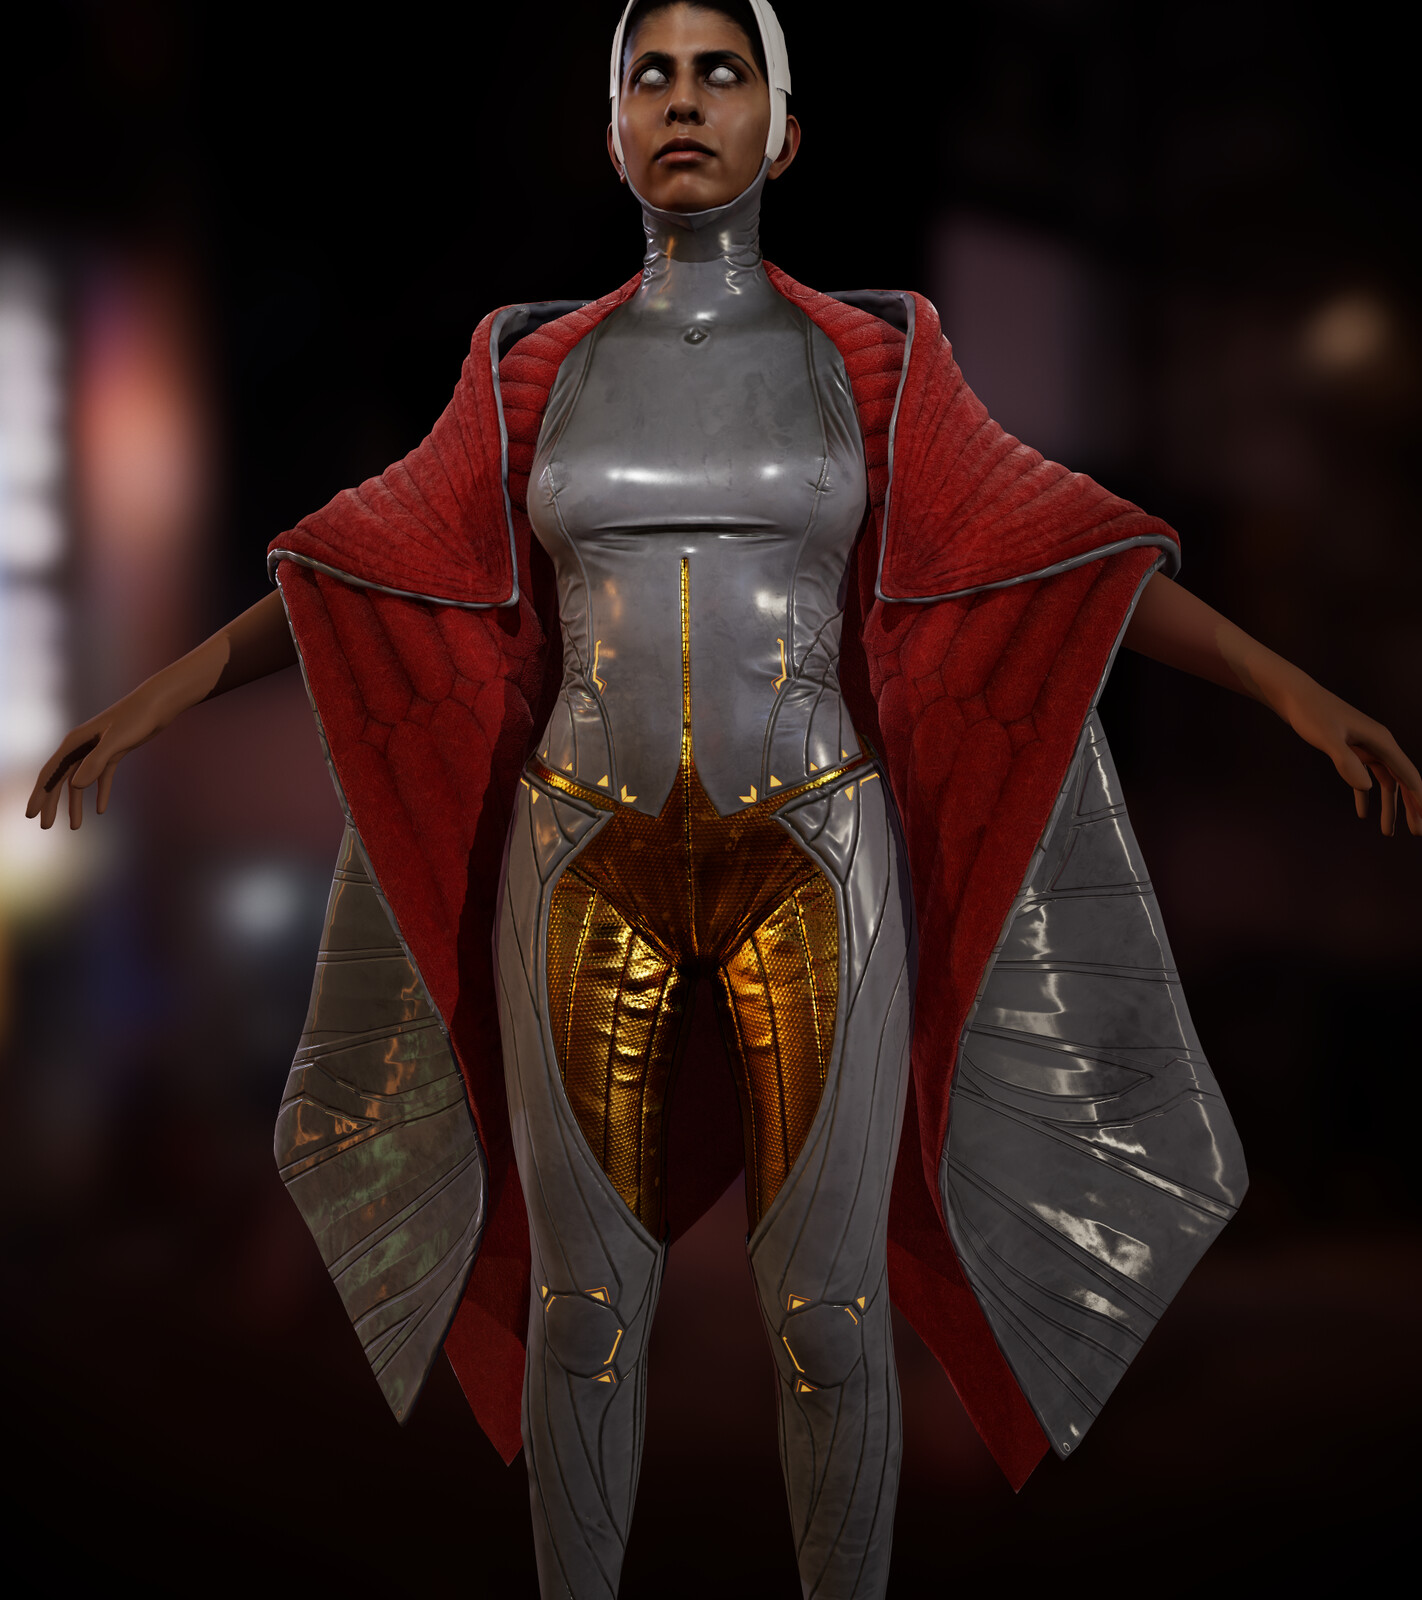 Marmoset render of the costume